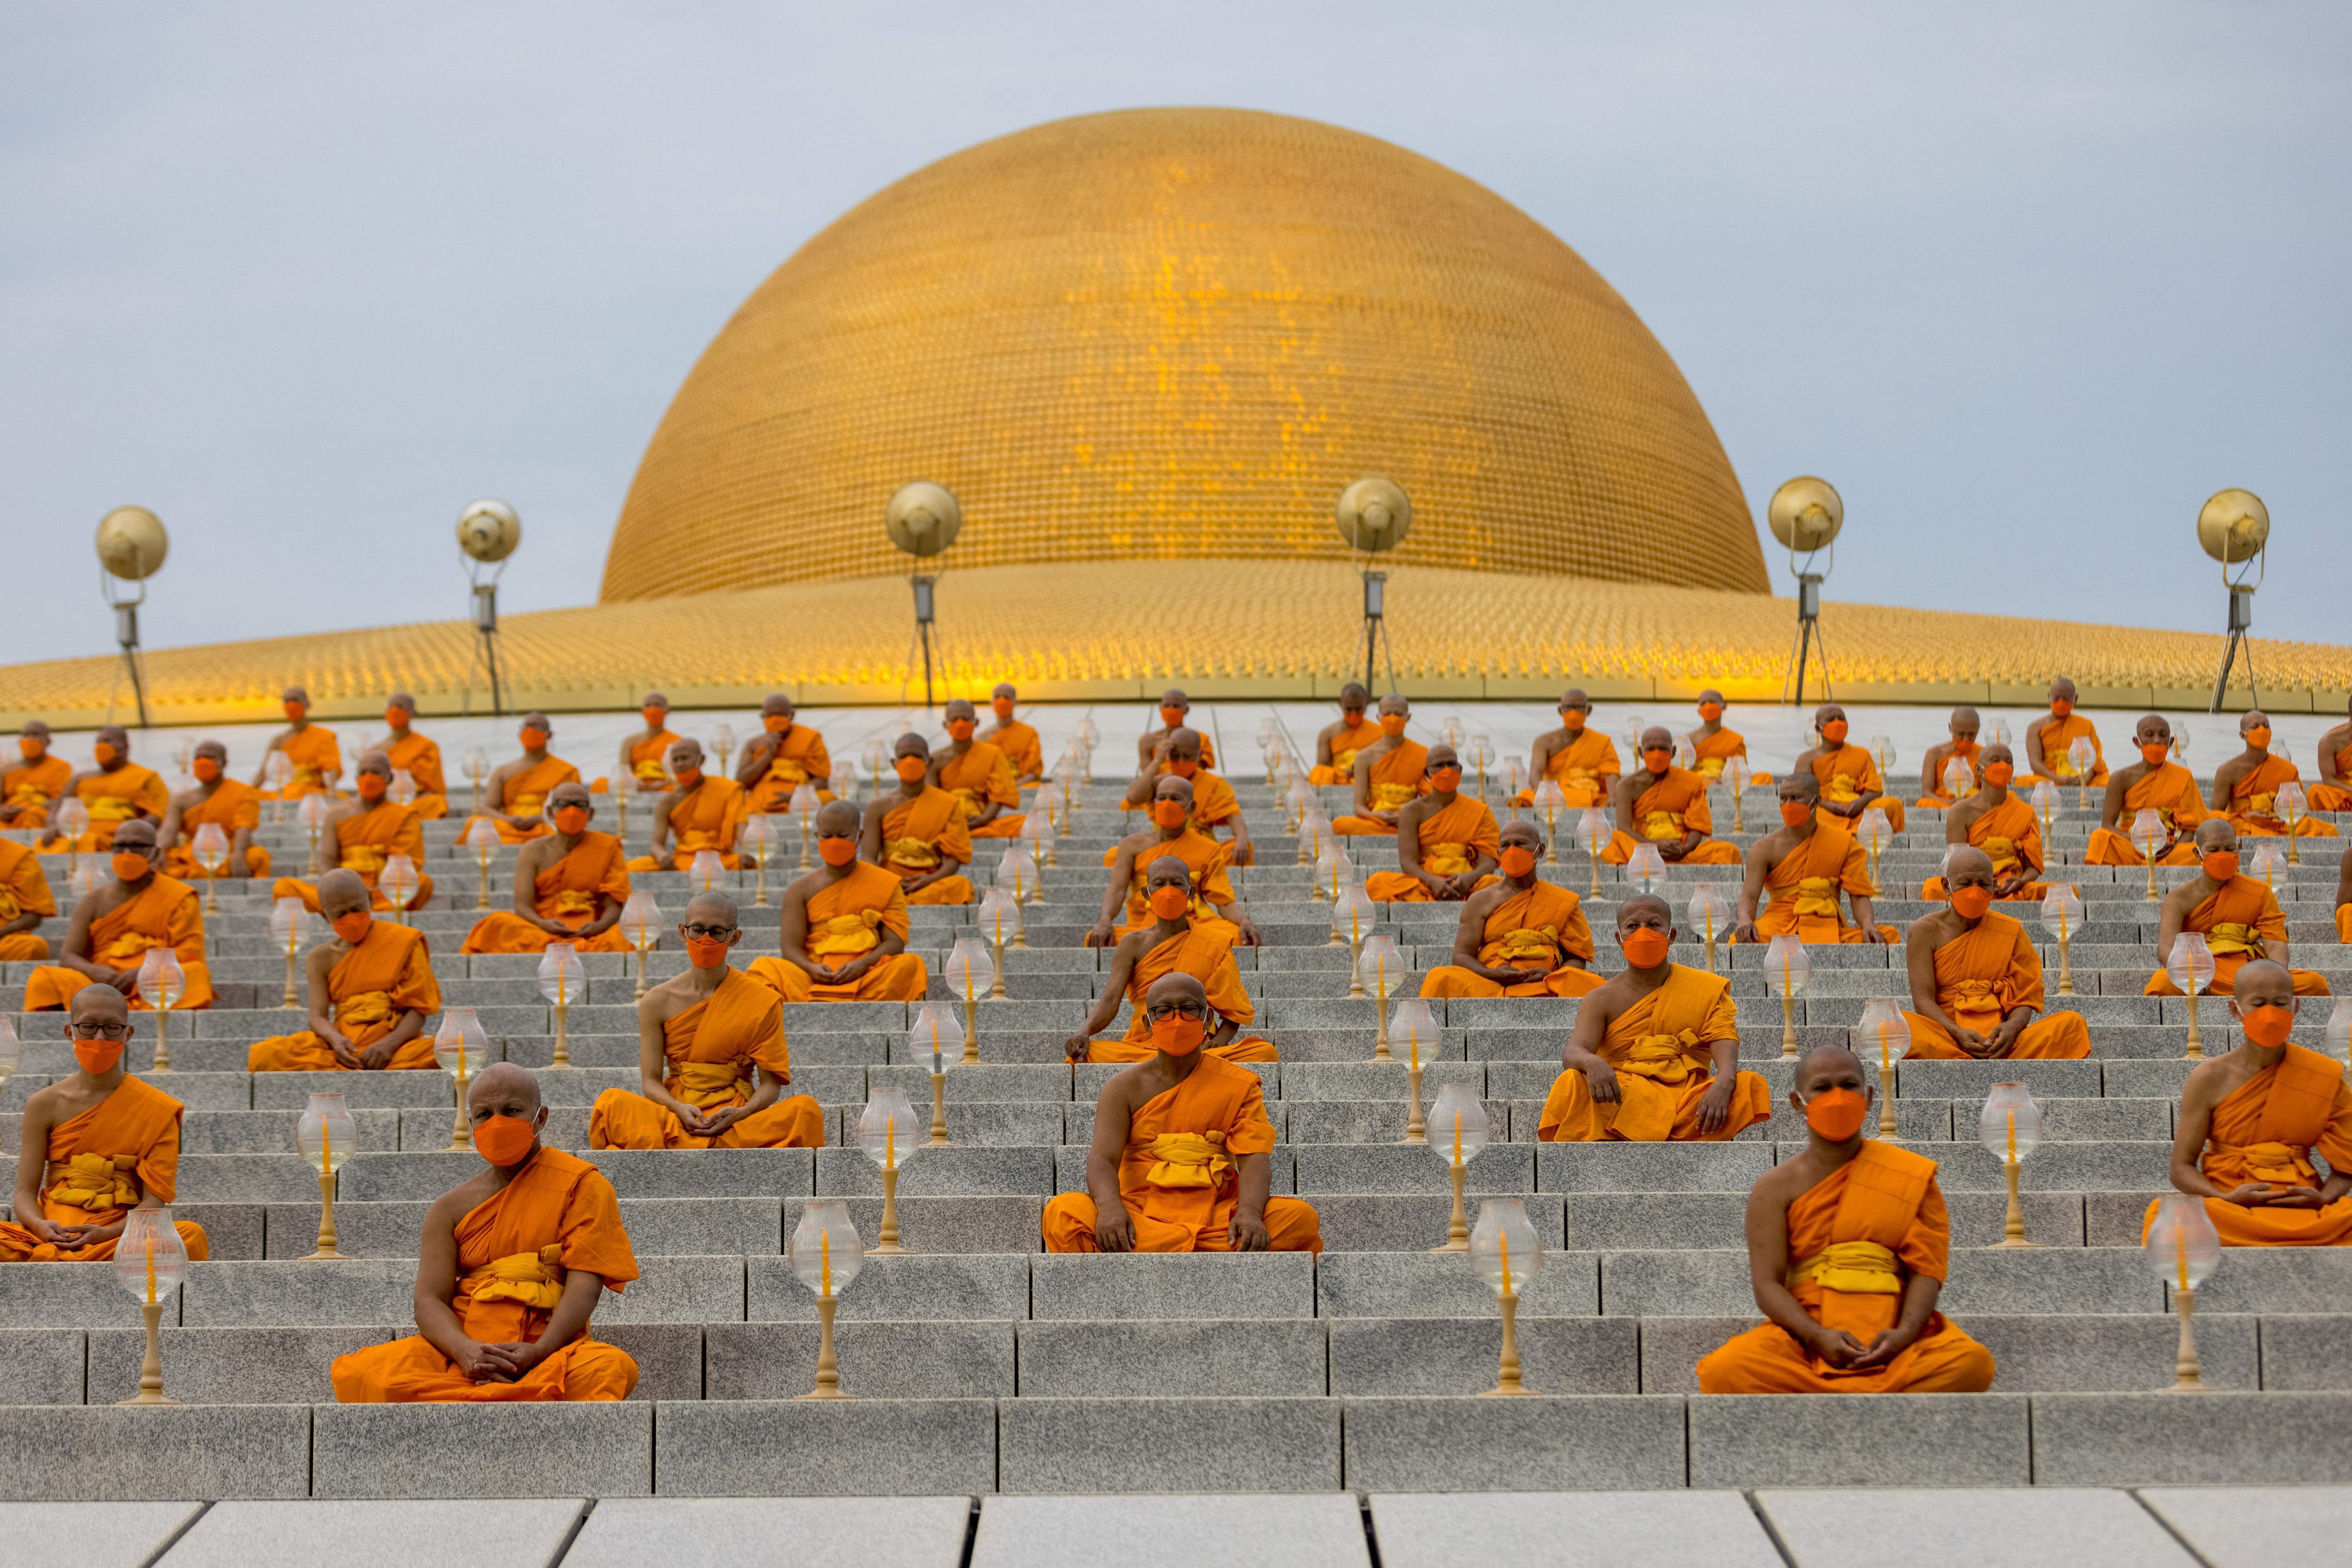 Today S Best Photos From Buddhist Monks To A Fishy Choice